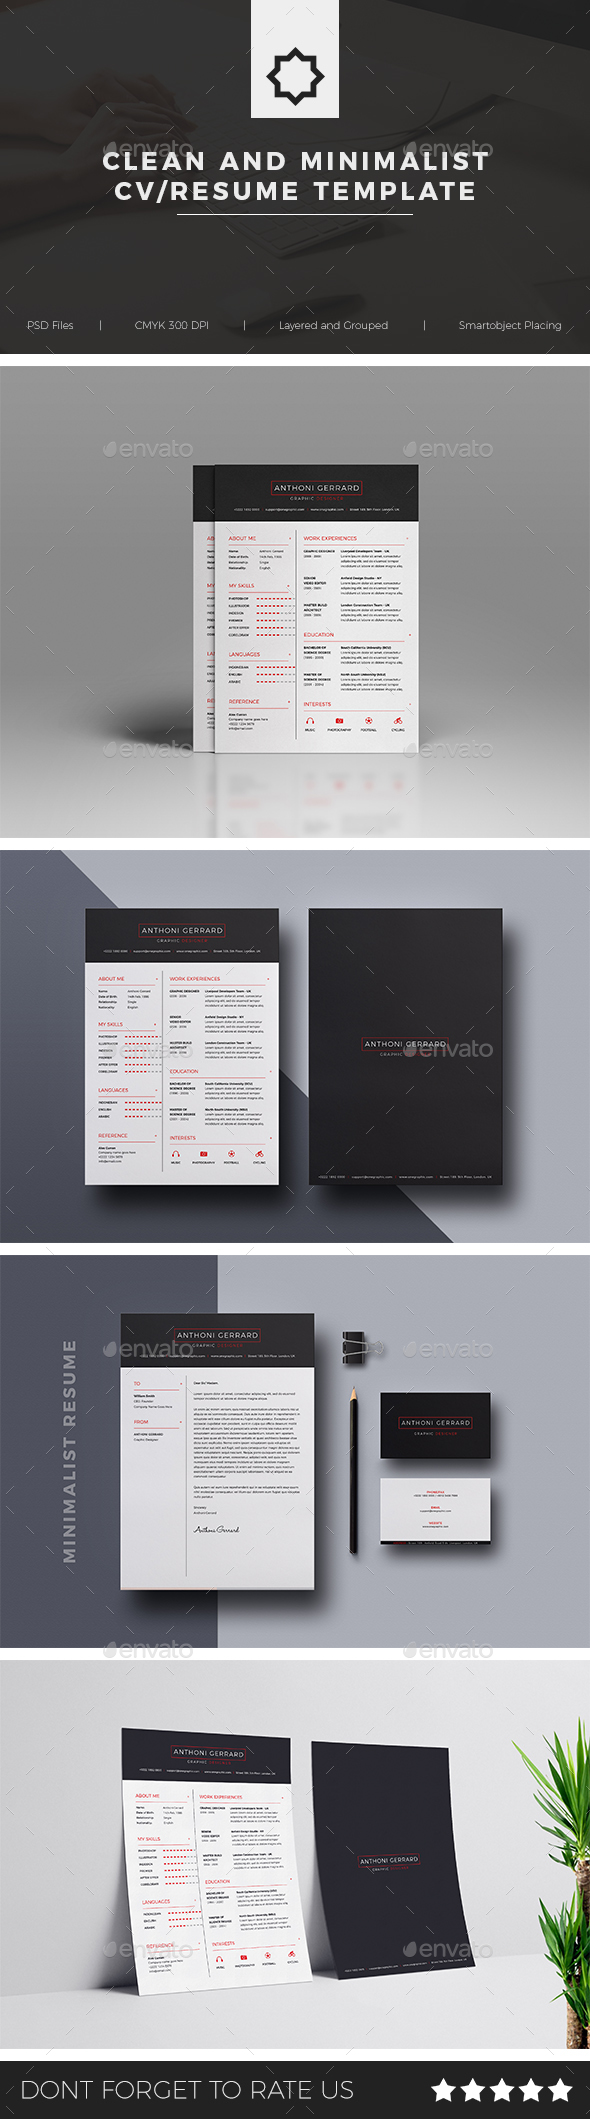 Clean and Minimalist CV / Resume Template